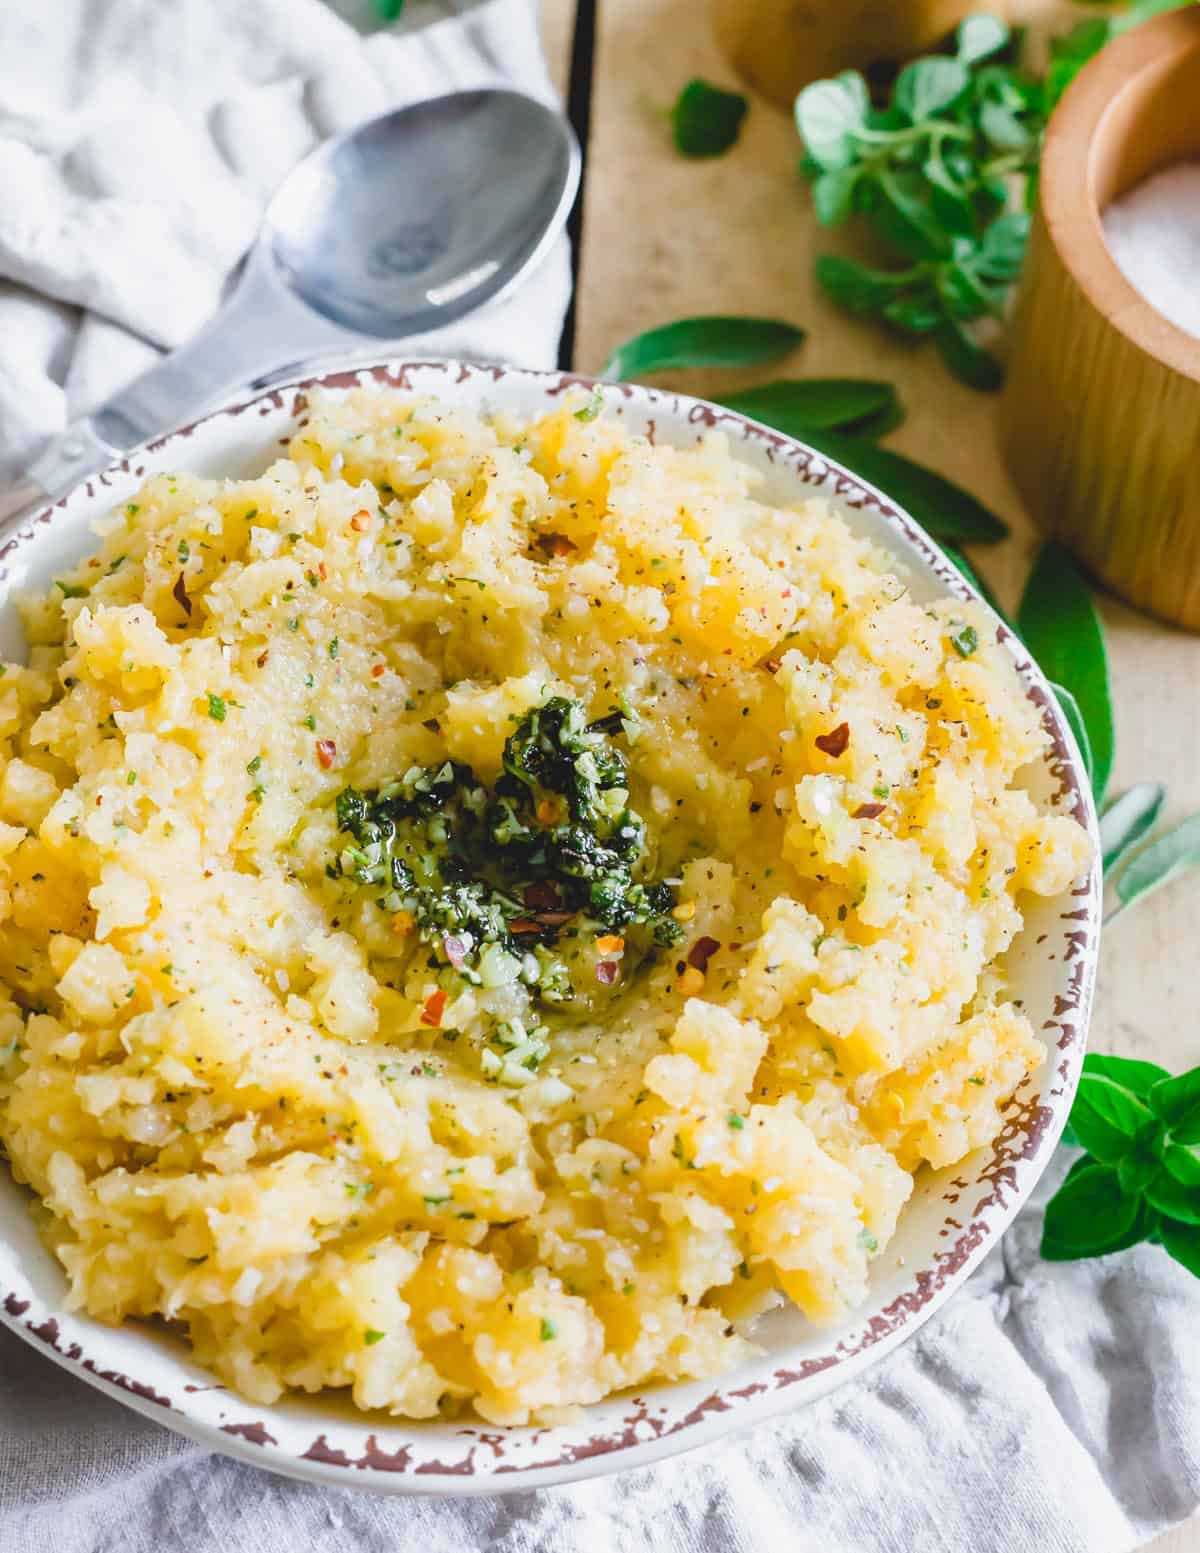 Mashed rutabaga recipe with garlic, herbs and butter.